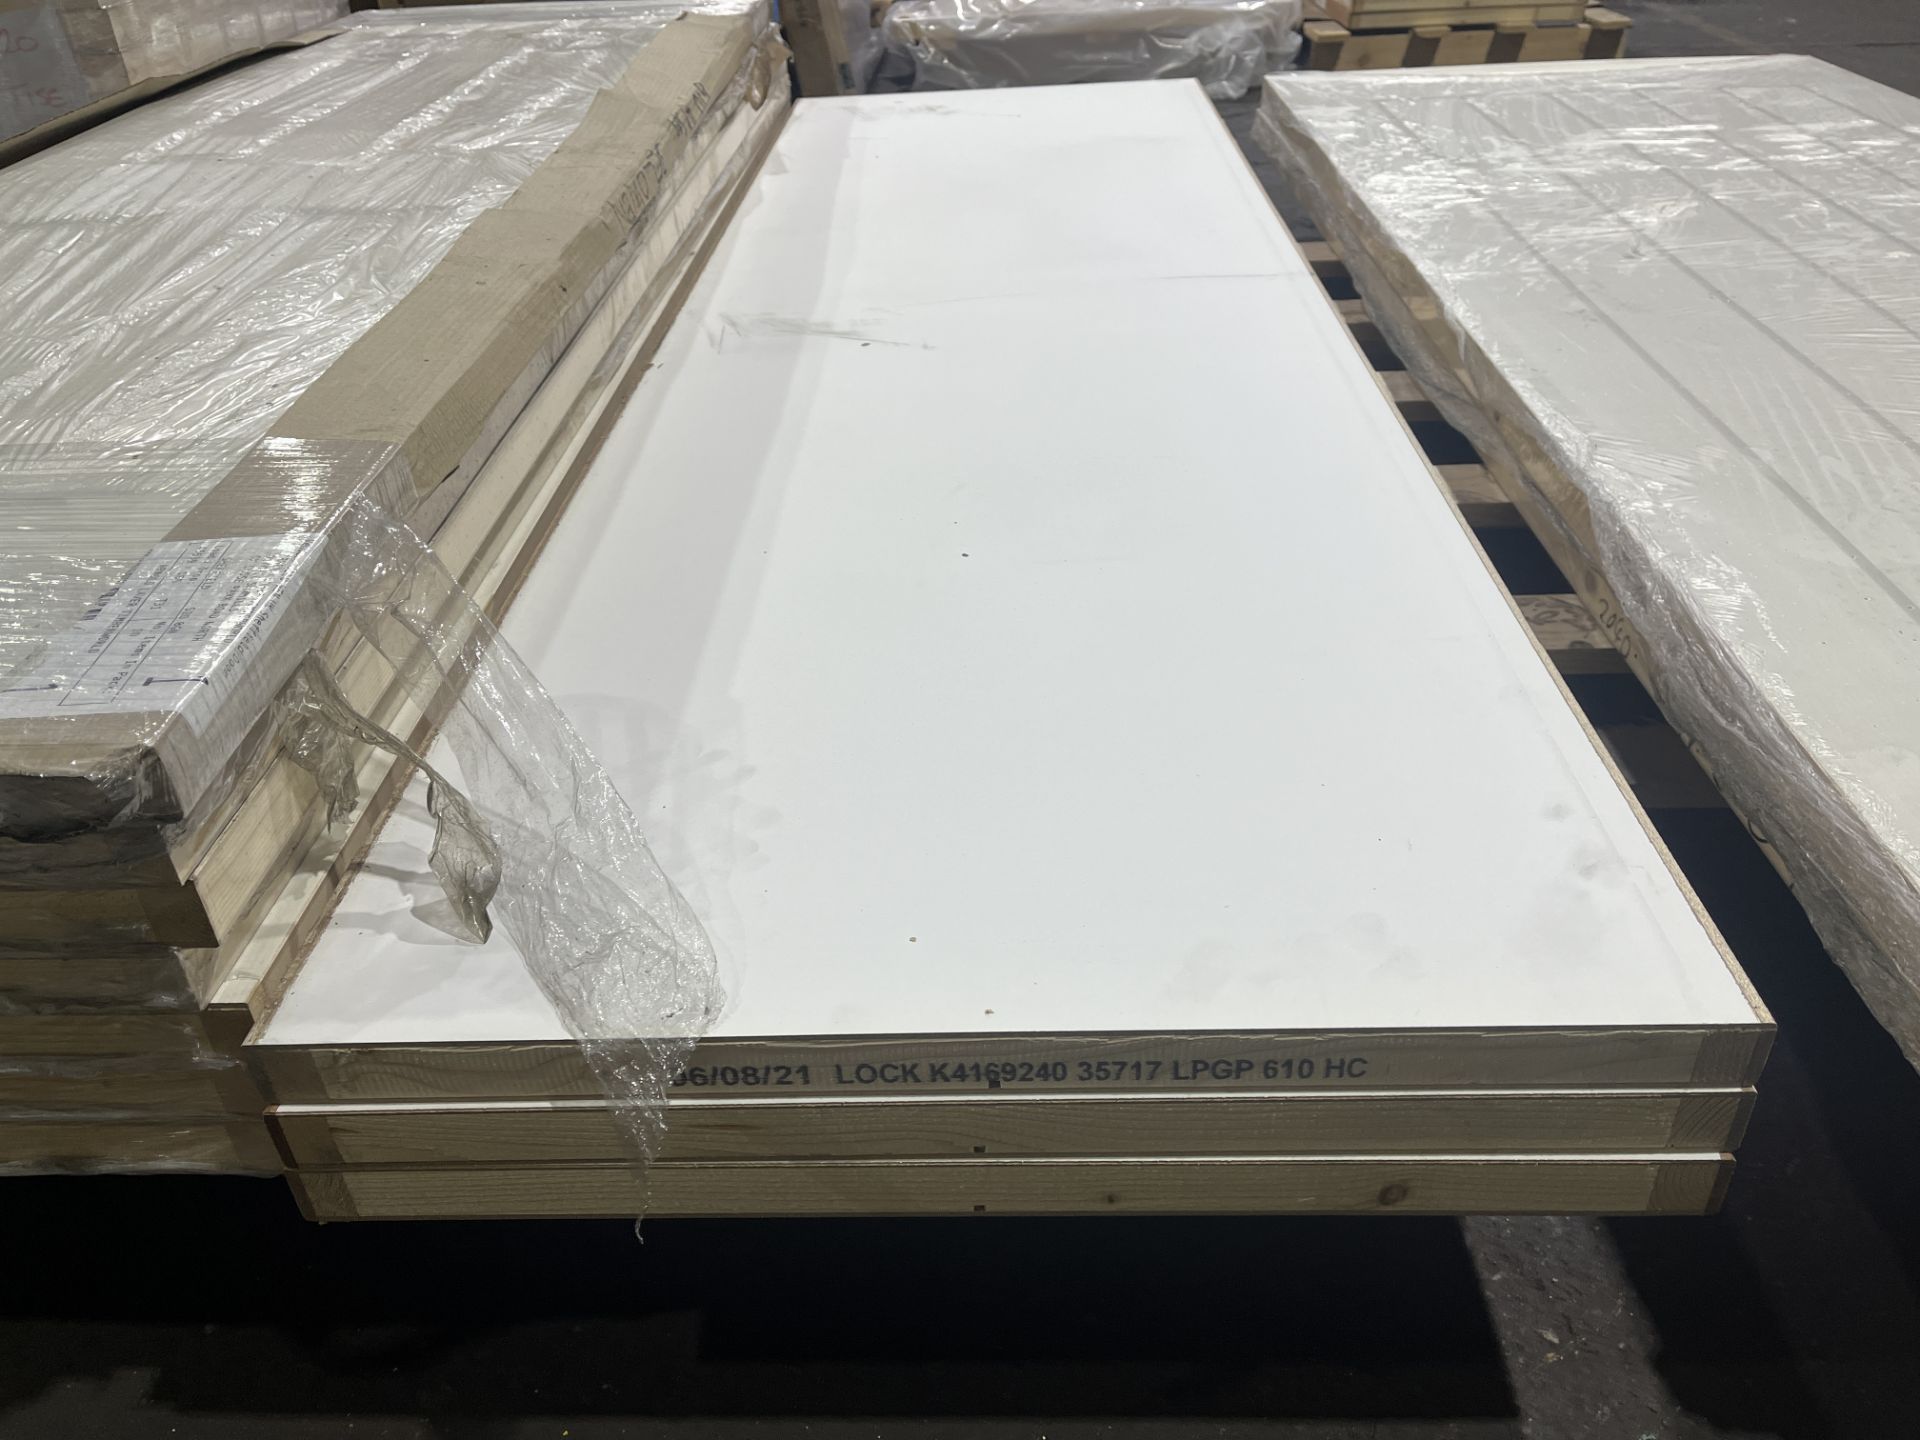 PALLET TO CONTAIN 4 X BRAND NEW PREMDOR PLAIN WHITE DOORS 78 X 24 X 1.5 INCHES SALEROOM 2 - Image 2 of 2